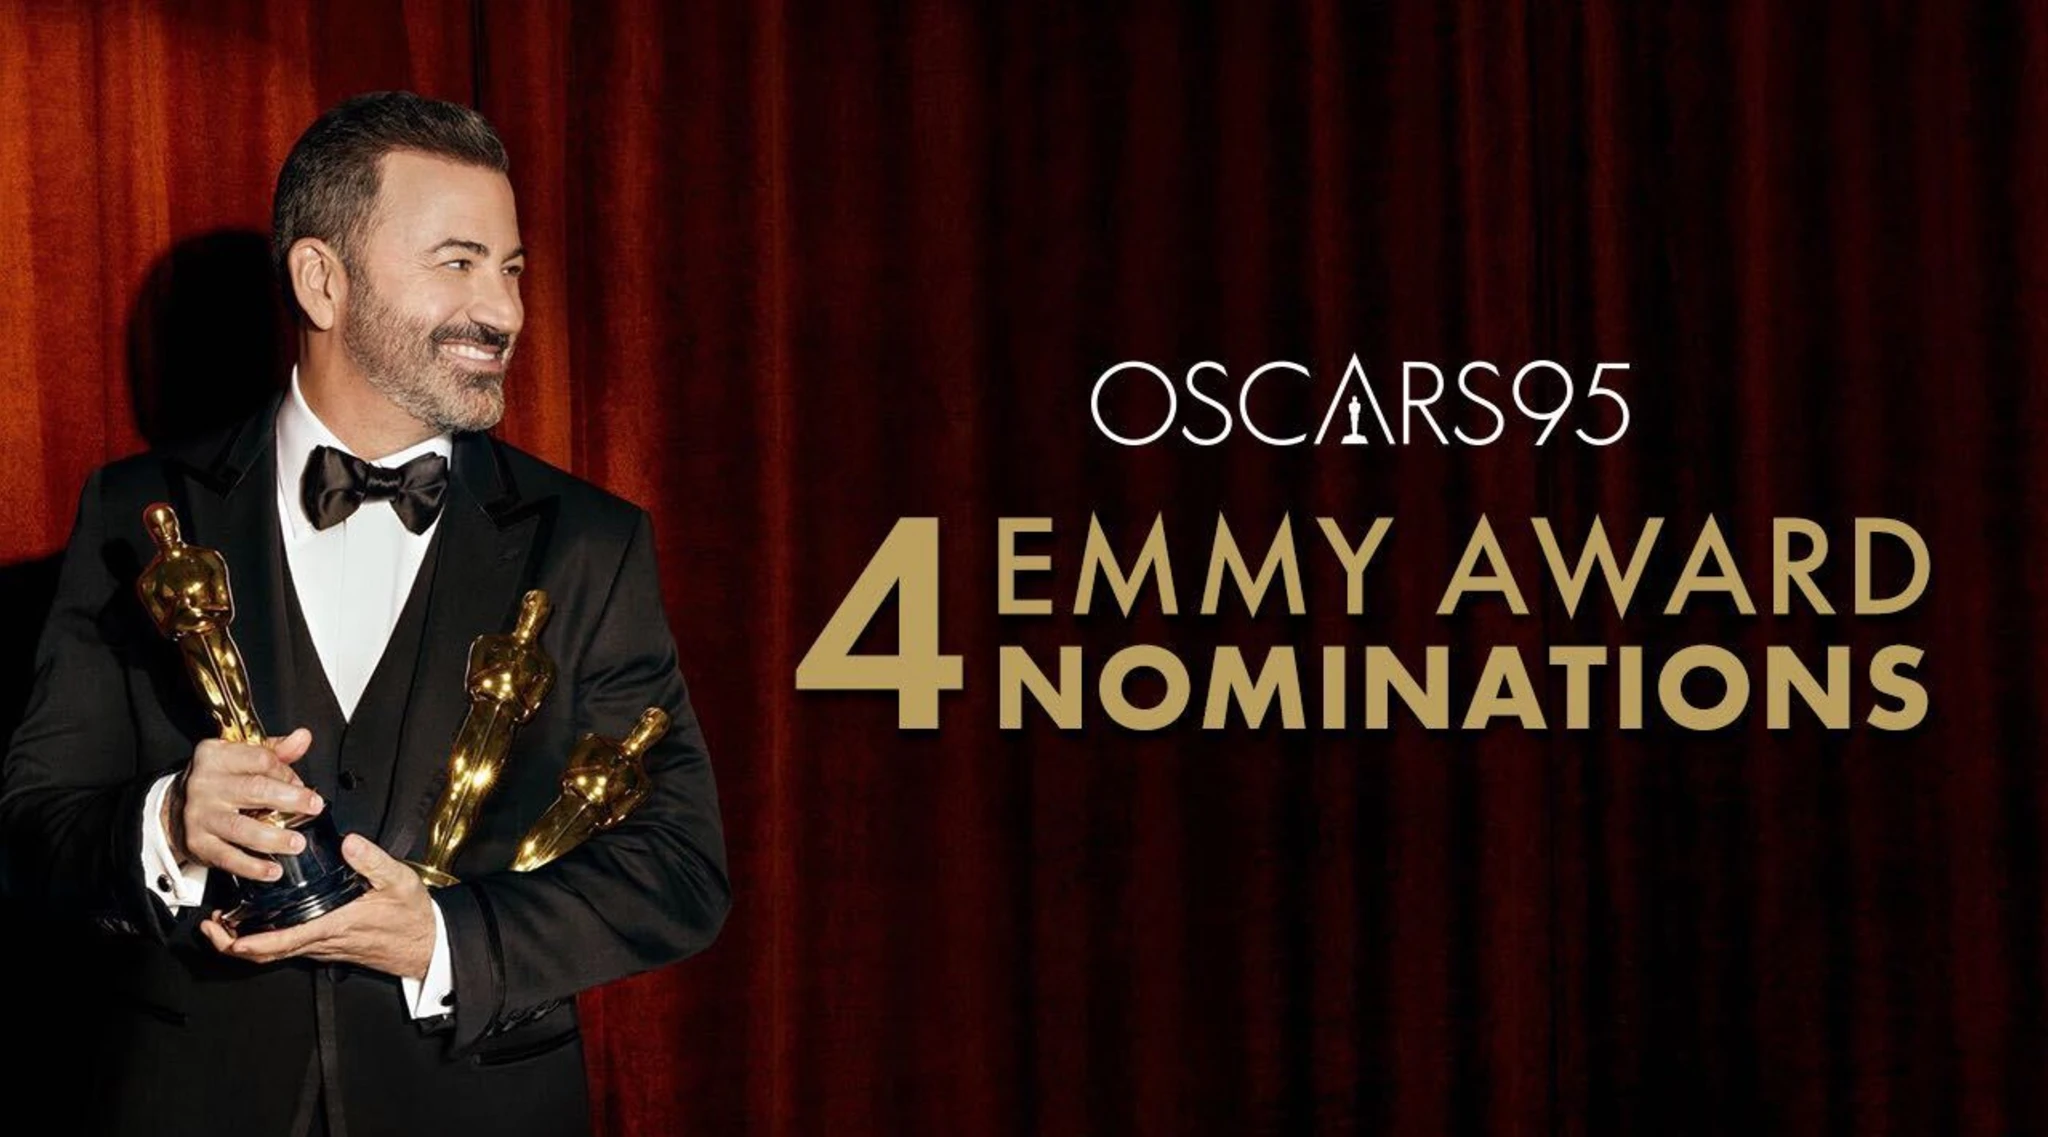 The 95th Oscars Receives Four Emmy Award Nominations